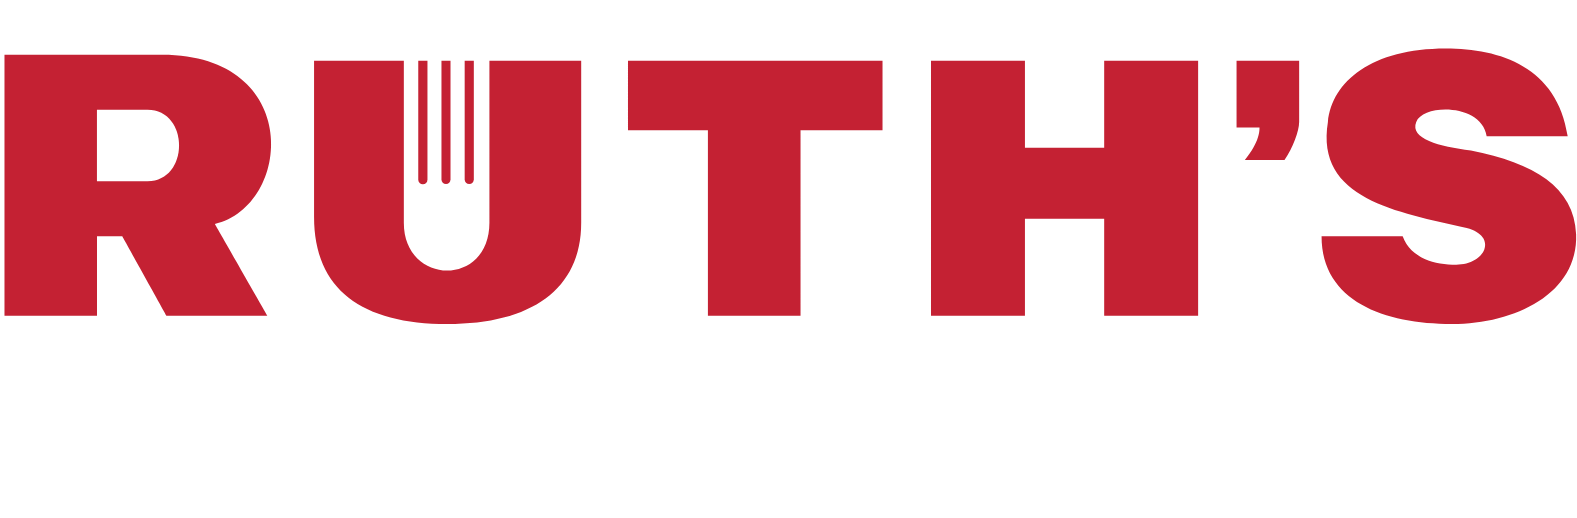 Ruth's Hospitality Group logo large for dark backgrounds (transparent PNG)